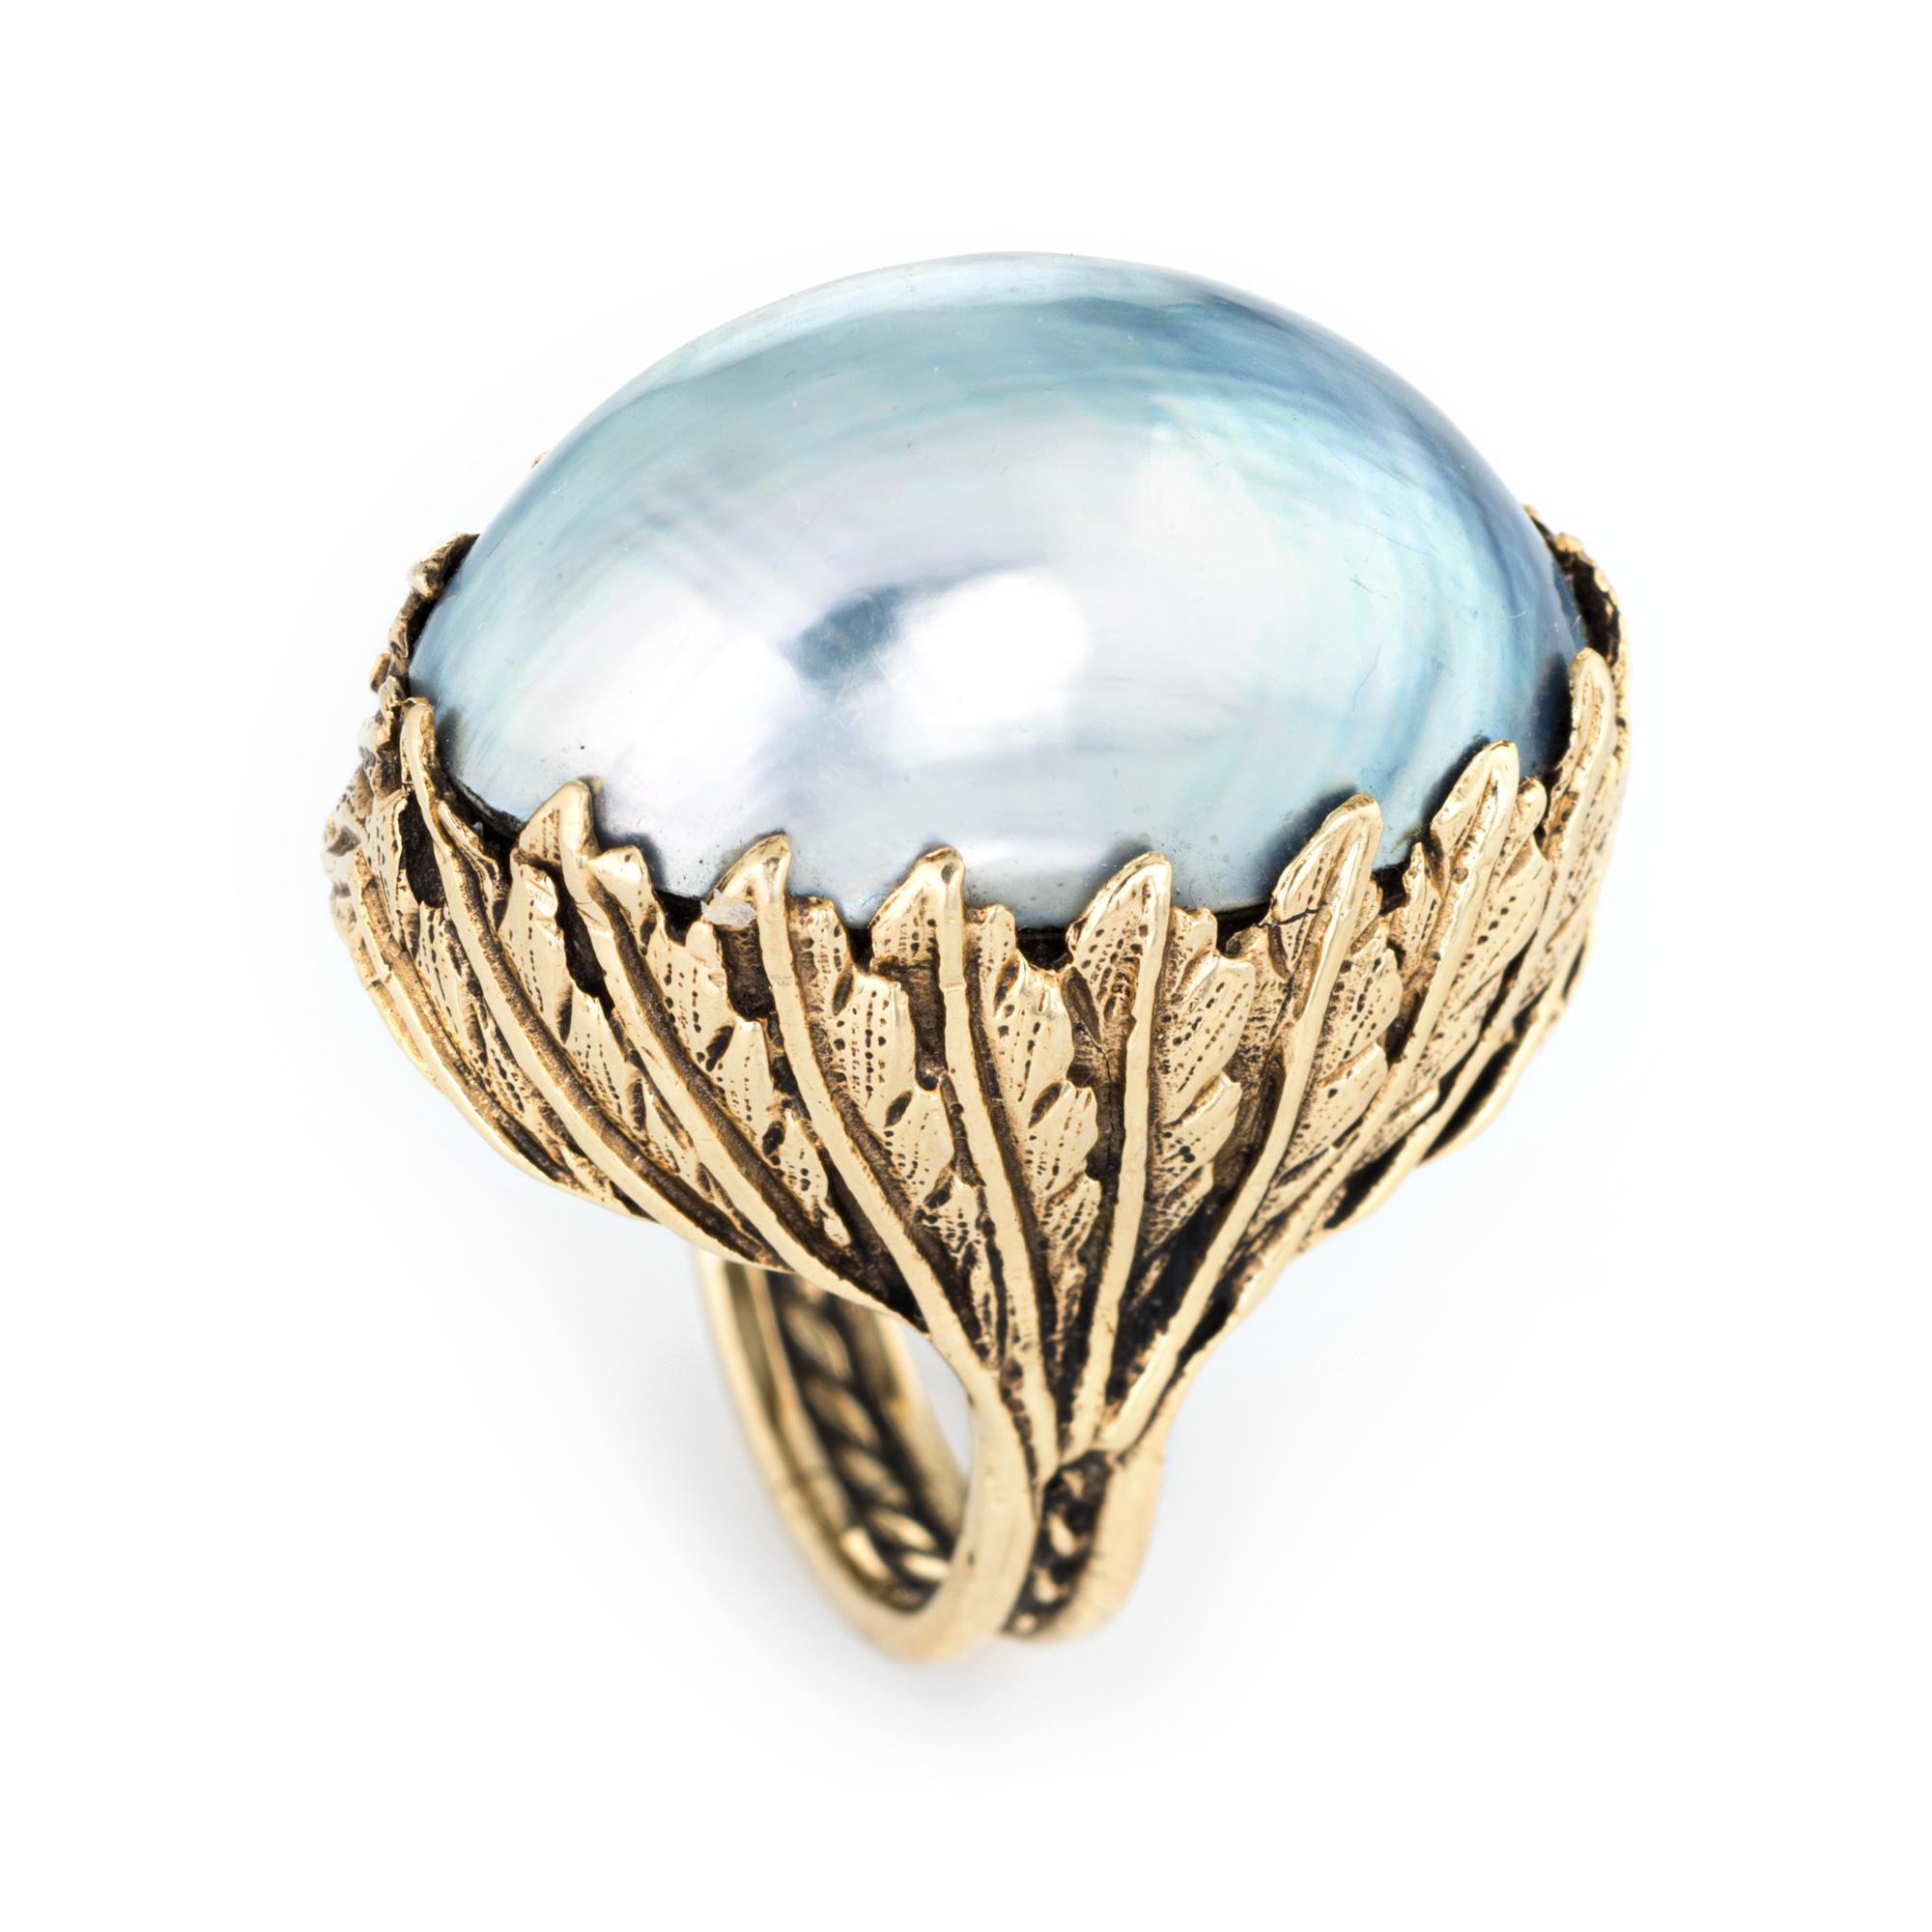 Stylish vintage large mabe pearl ring (circa 1960s to 1970s) crafted in 14 karat yellow gold. 

Large mabe pearl measures 25mm x 15mm. The pearl exhibits a silver to light blue color with good luster. The pearl is in excellent condition and free of